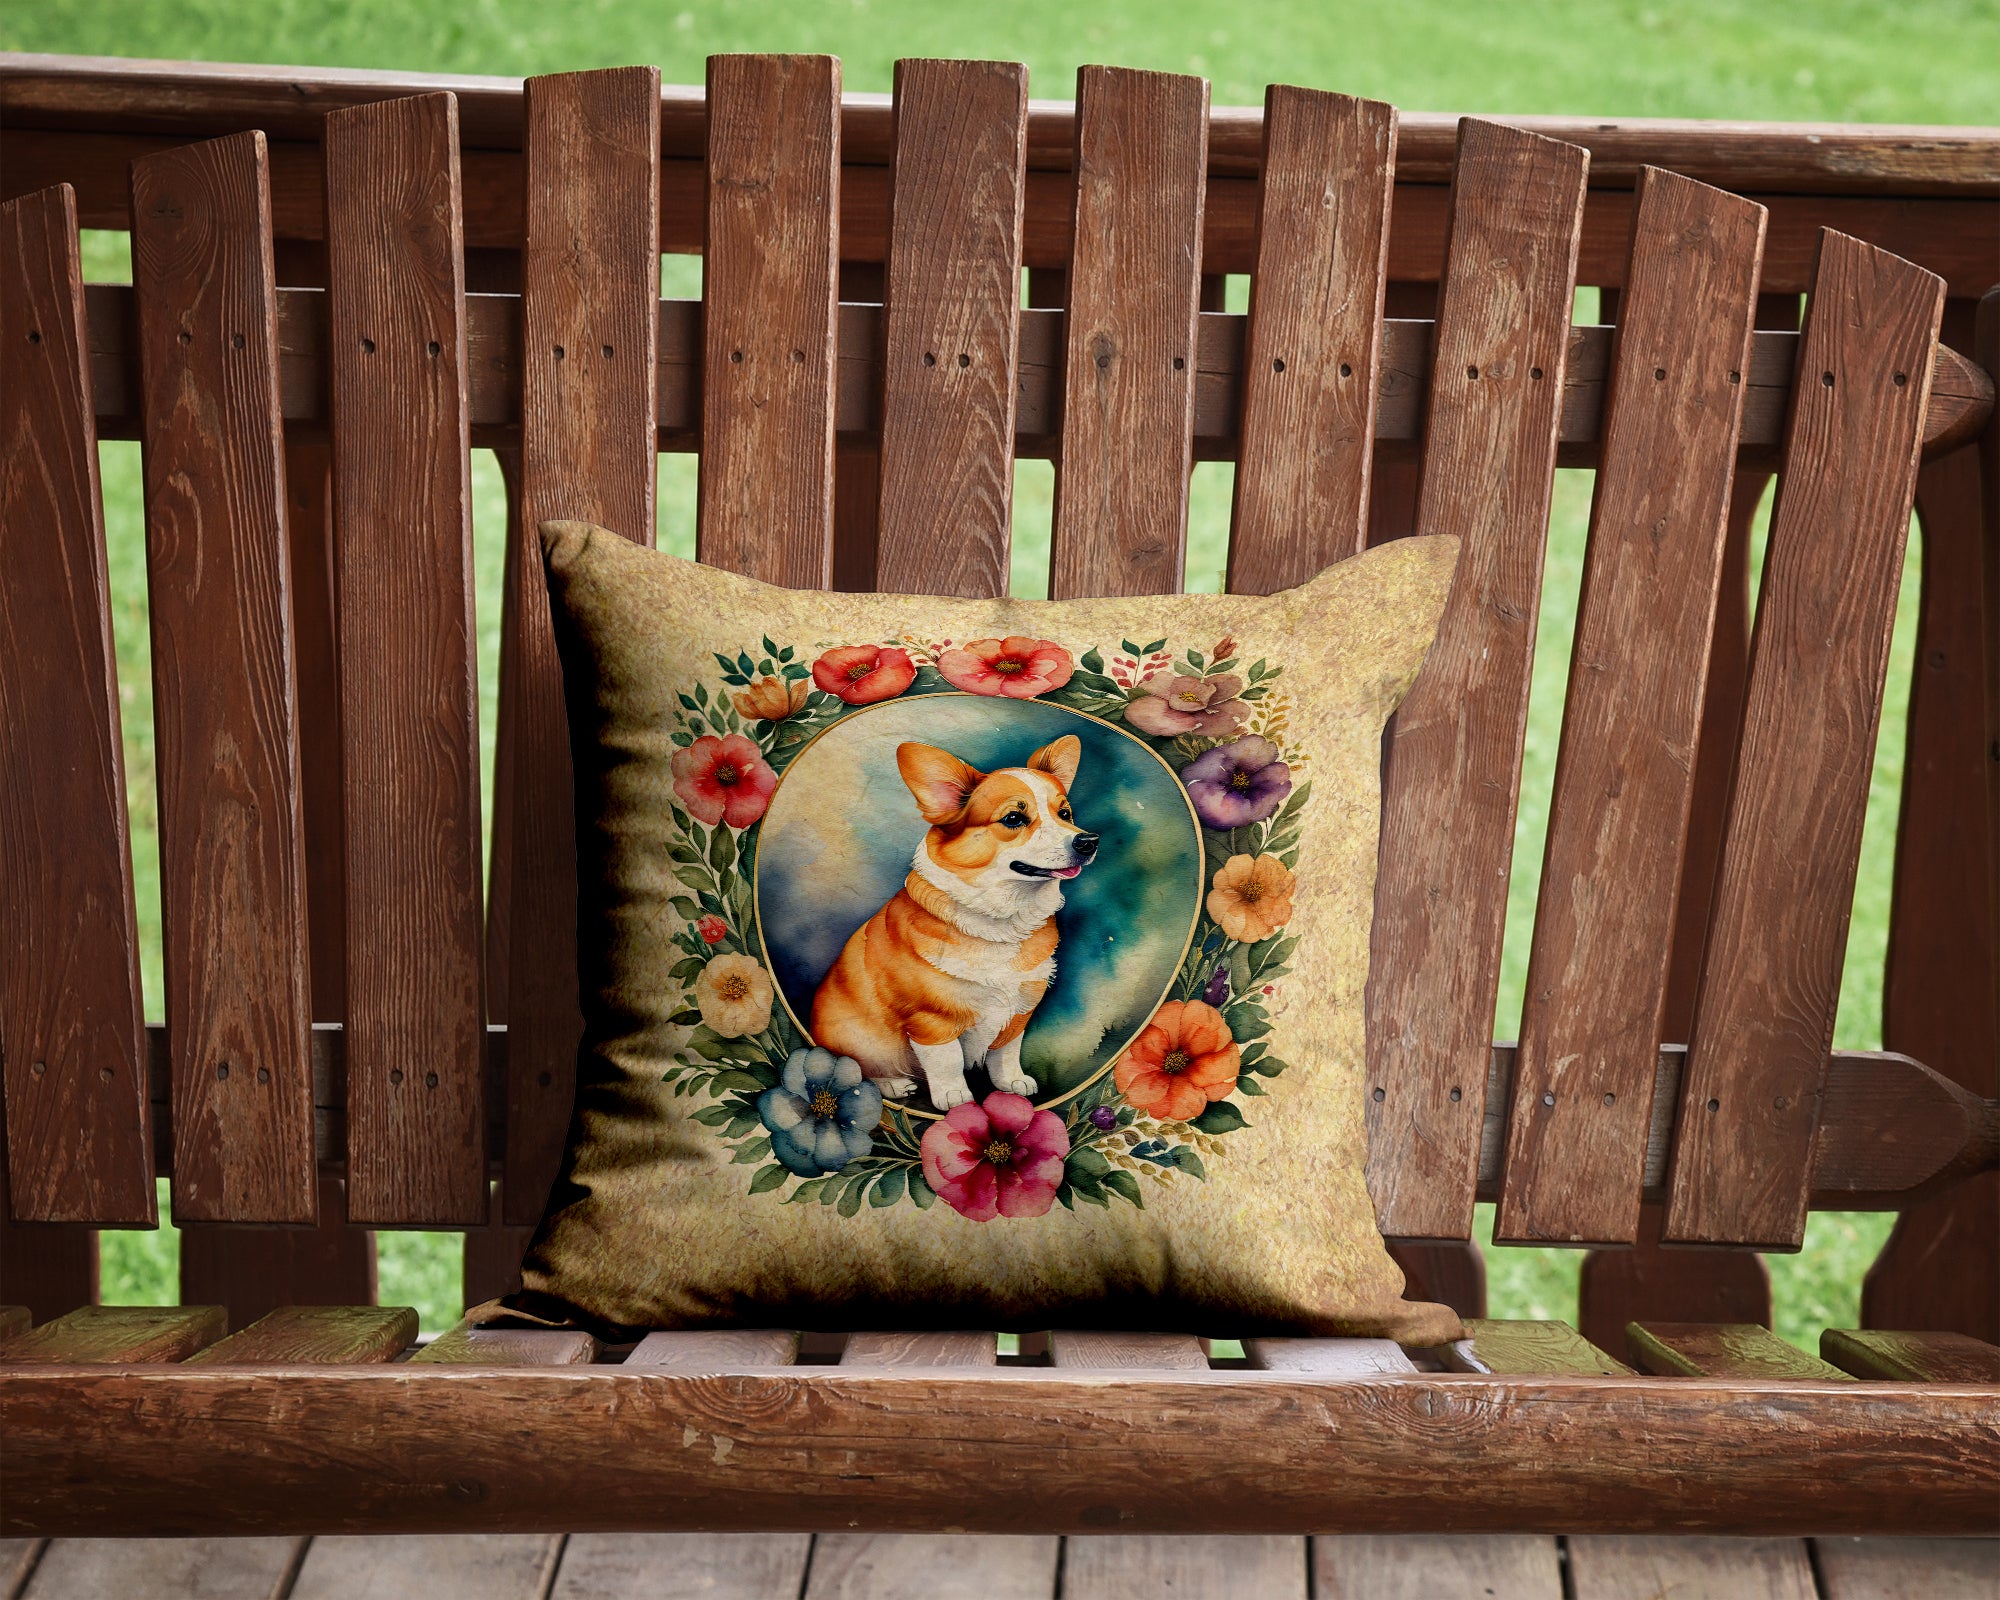 Buy this Corgi and Flowers Fabric Decorative Pillow